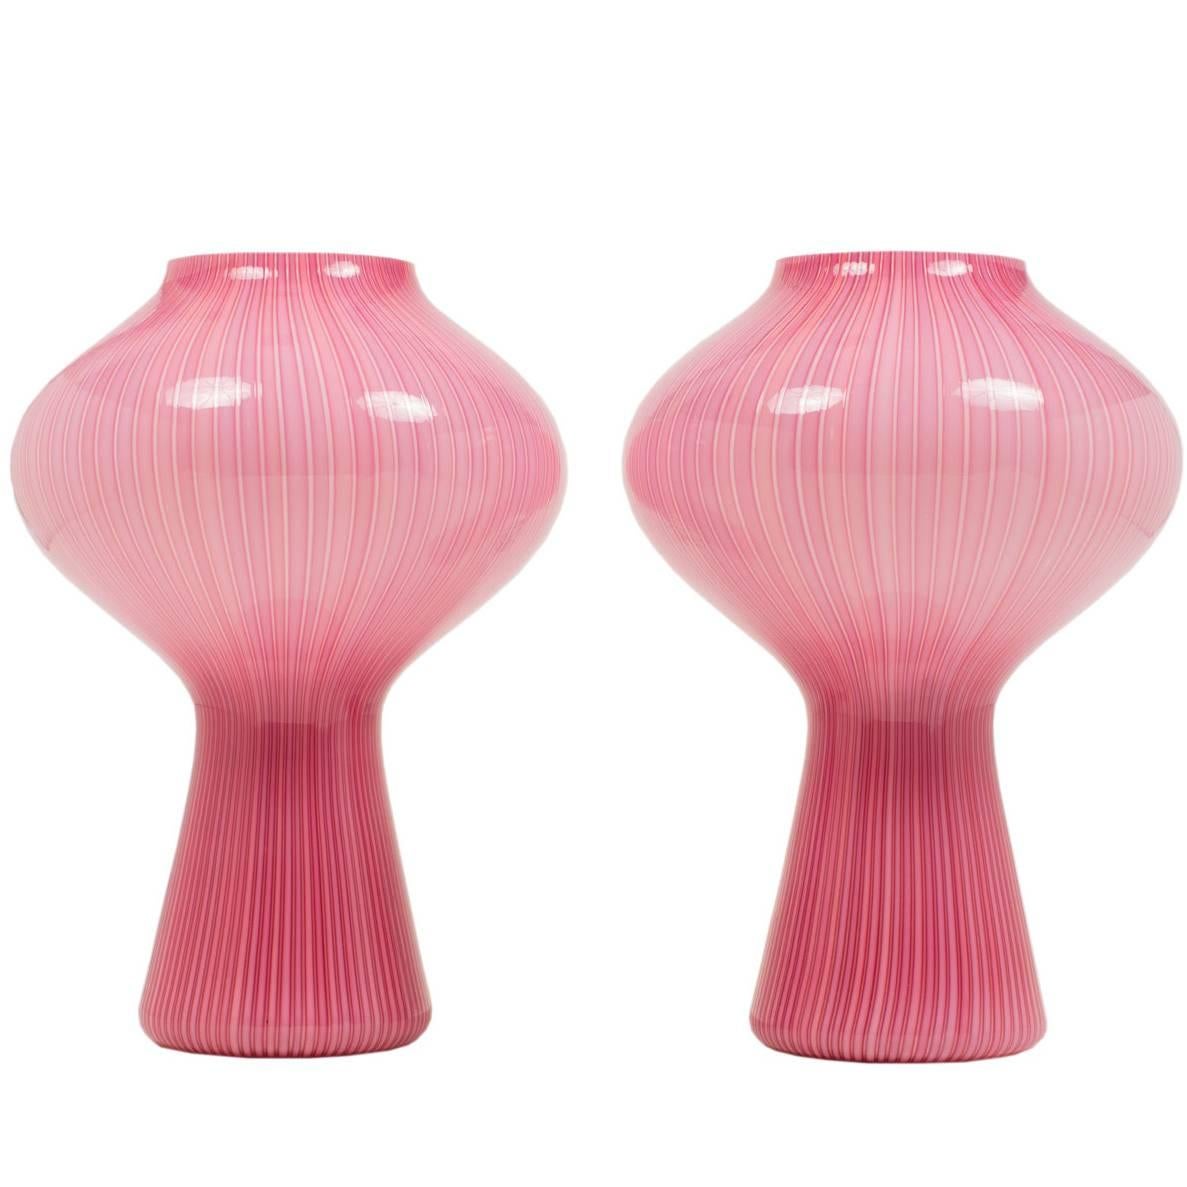 Candy Pink 1950s Venini  Lamps by Carlo Scarpa